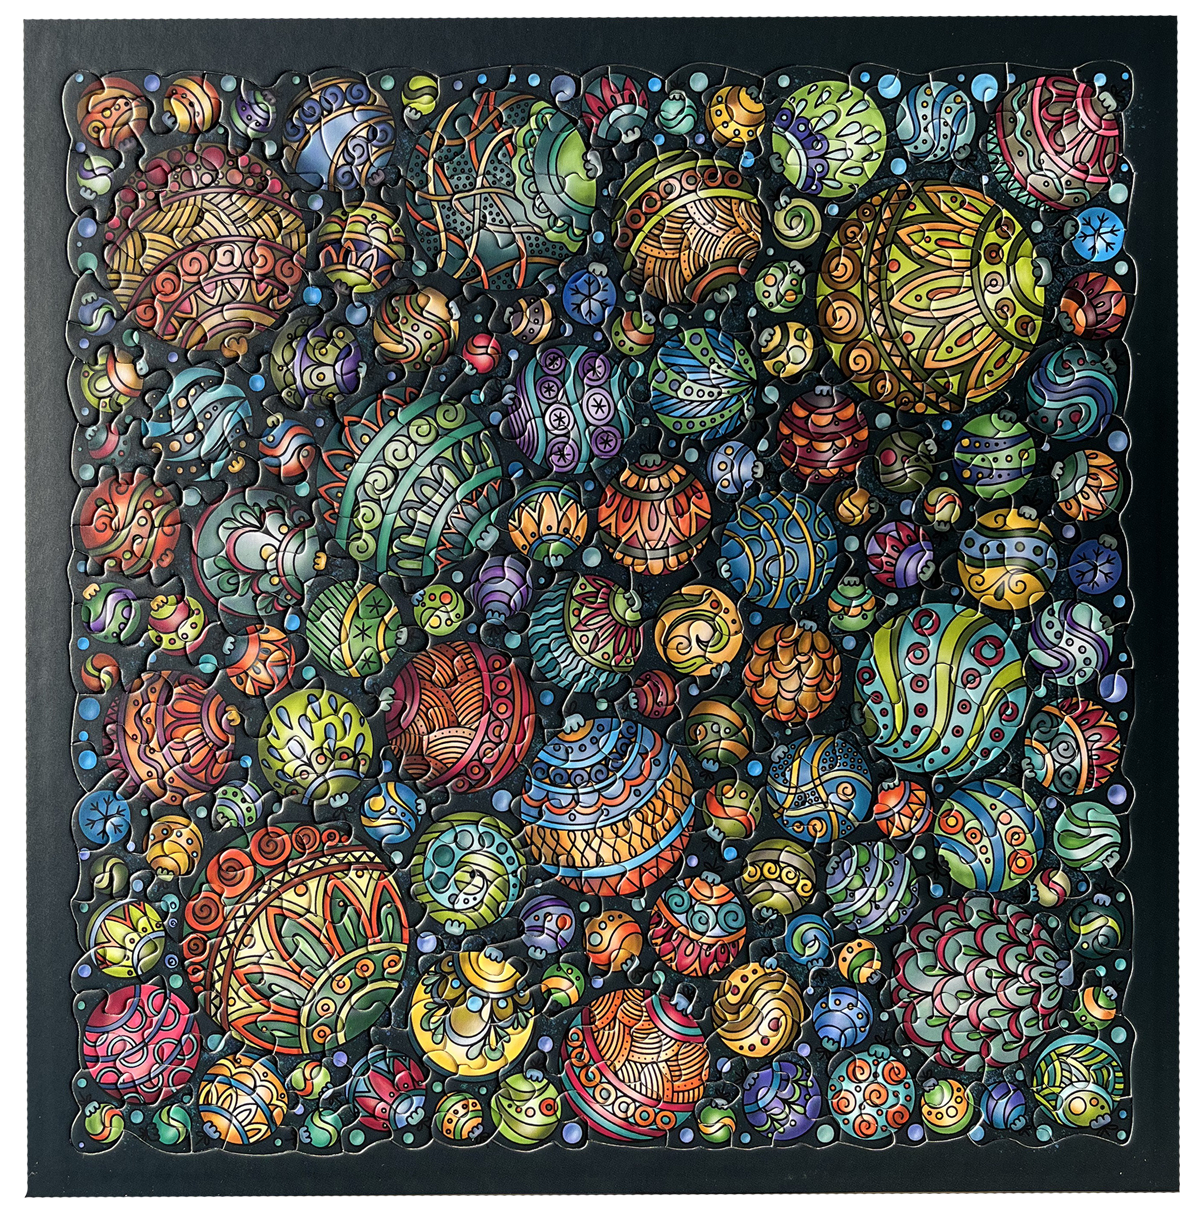 Puzzle Palapeli "Ball Colored"